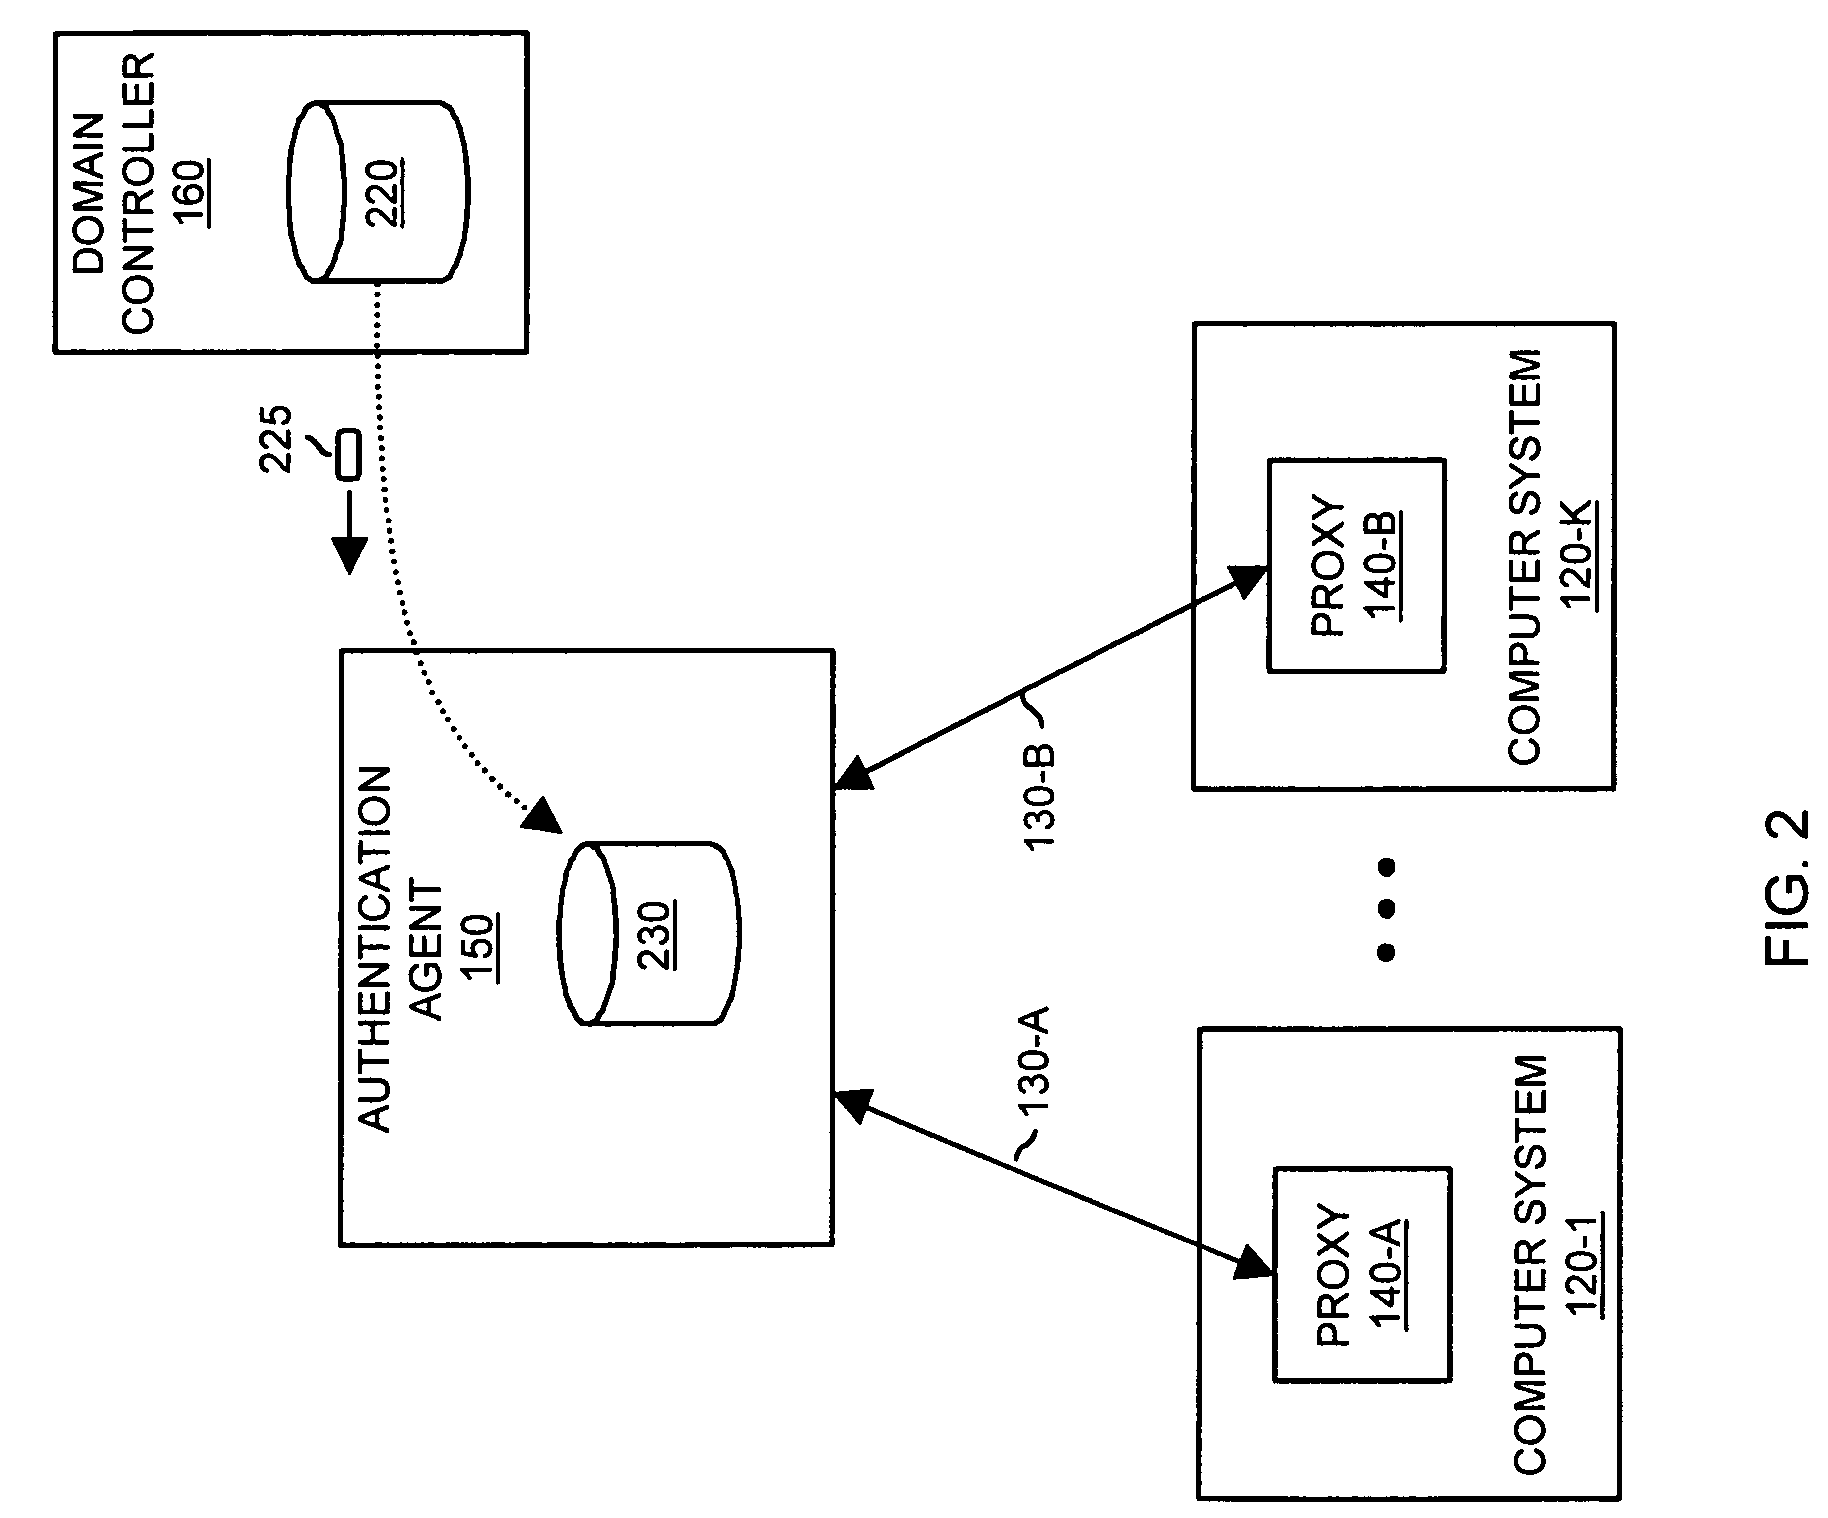 Methods and apparatus for implementing authentication